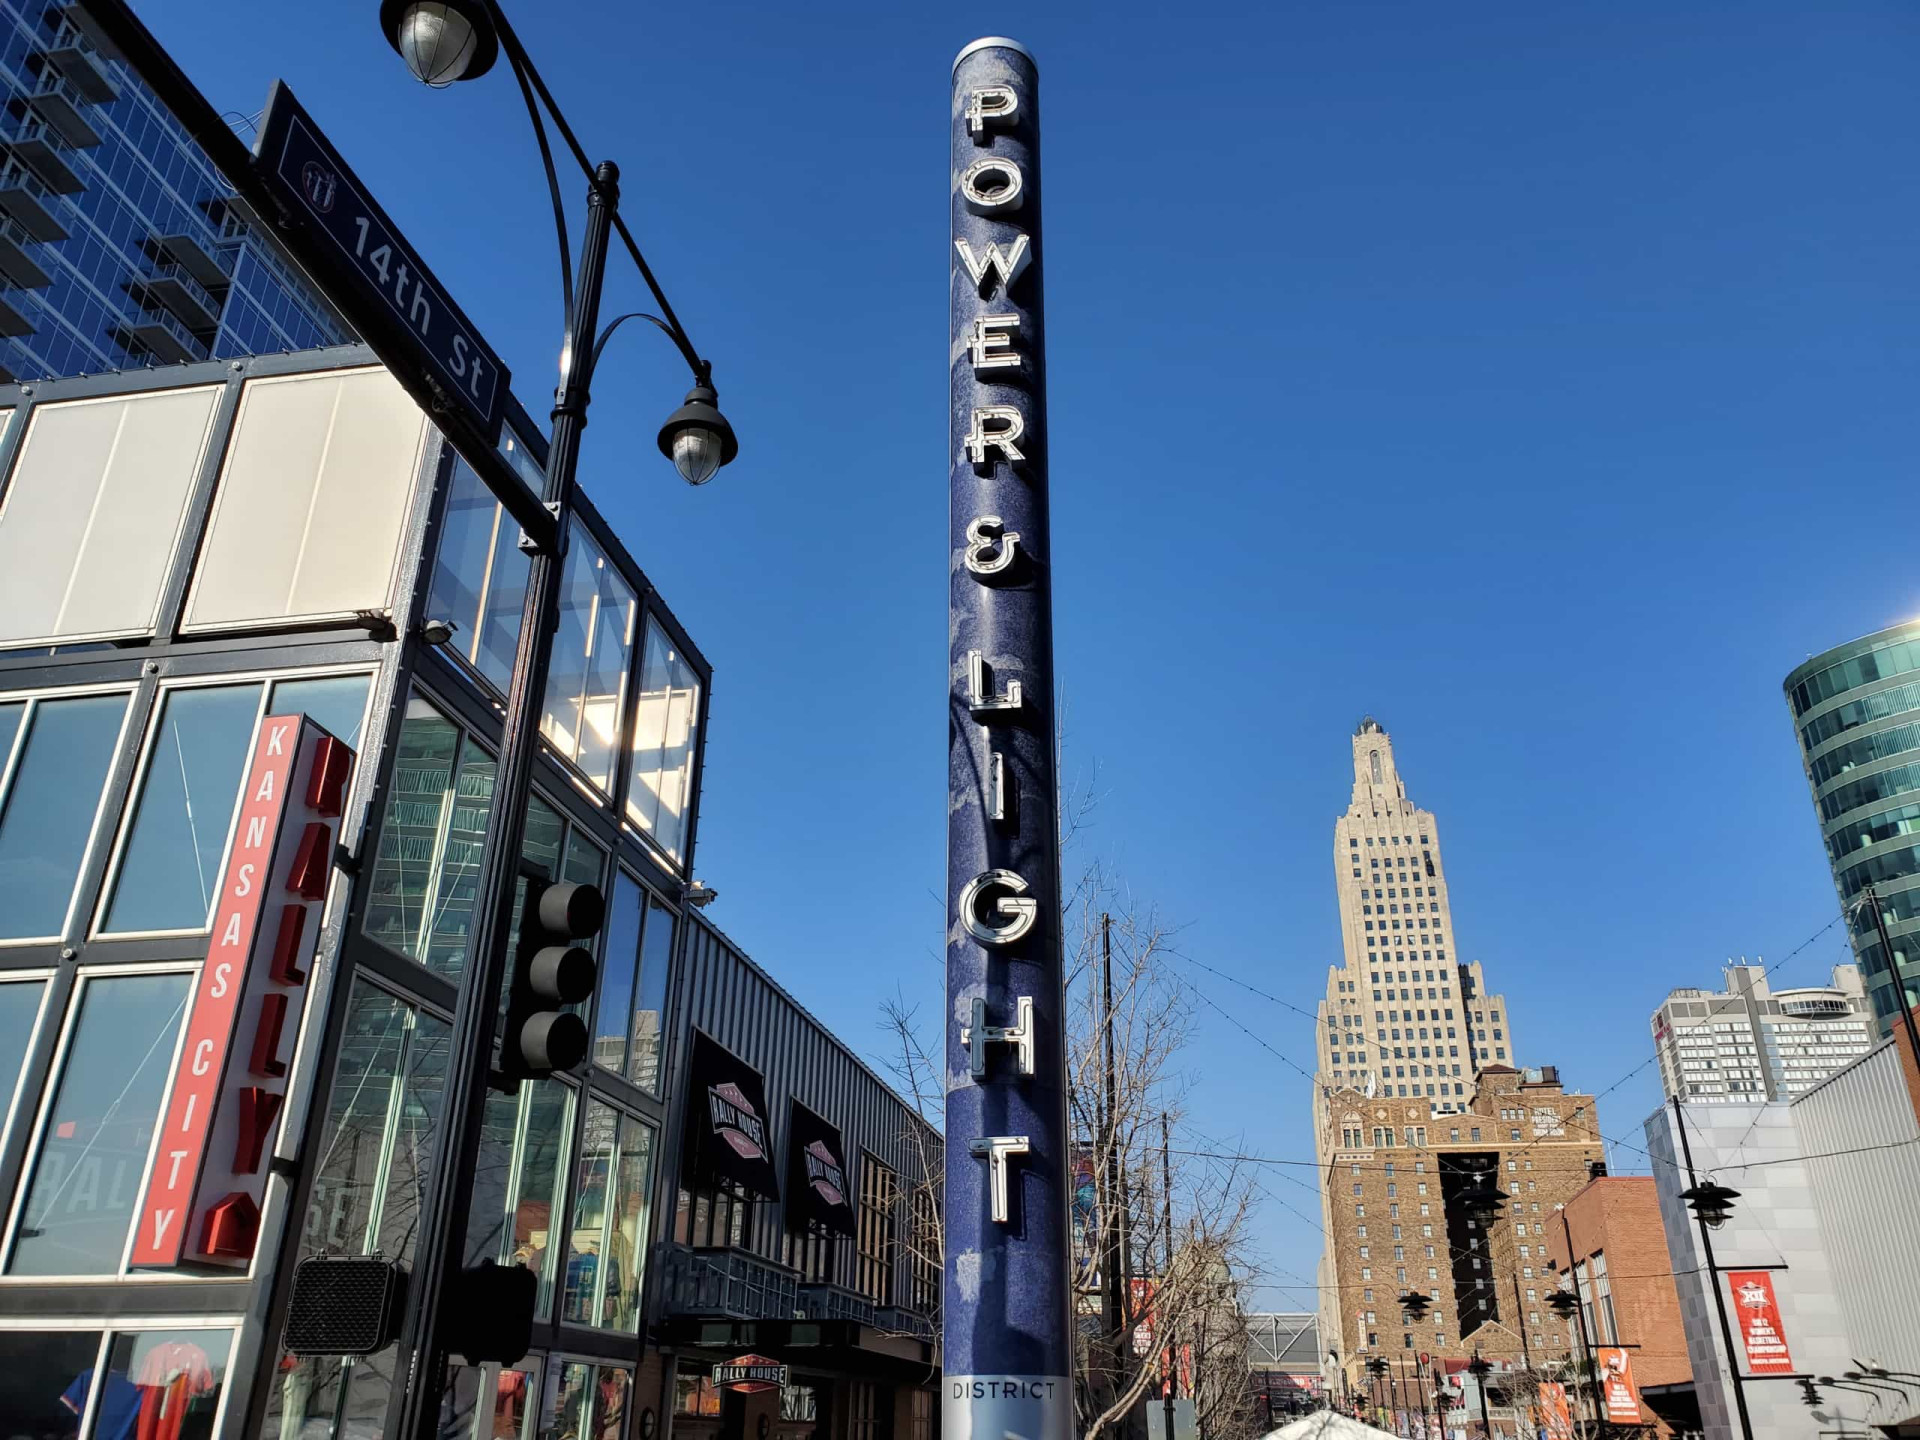 <p>Sports fans, shoppers, and party people all make a beeline for Kansas City's lively Power & Light District. The eight-block entertainment hub is home to buzzing bars, restaurants, and chic boutiques, and the Sprint Center hosts major basketball games.</p><p><a href="https://www.msn.com/en-us/community/channel/vid-7xx8mnucu55yw63we9va2gwr7uihbxwc68fxqp25x6tg4ftibpra?cvid=94631541bc0f4f89bfd59158d696ad7e">Follow us and access great exclusive content every day</a></p>